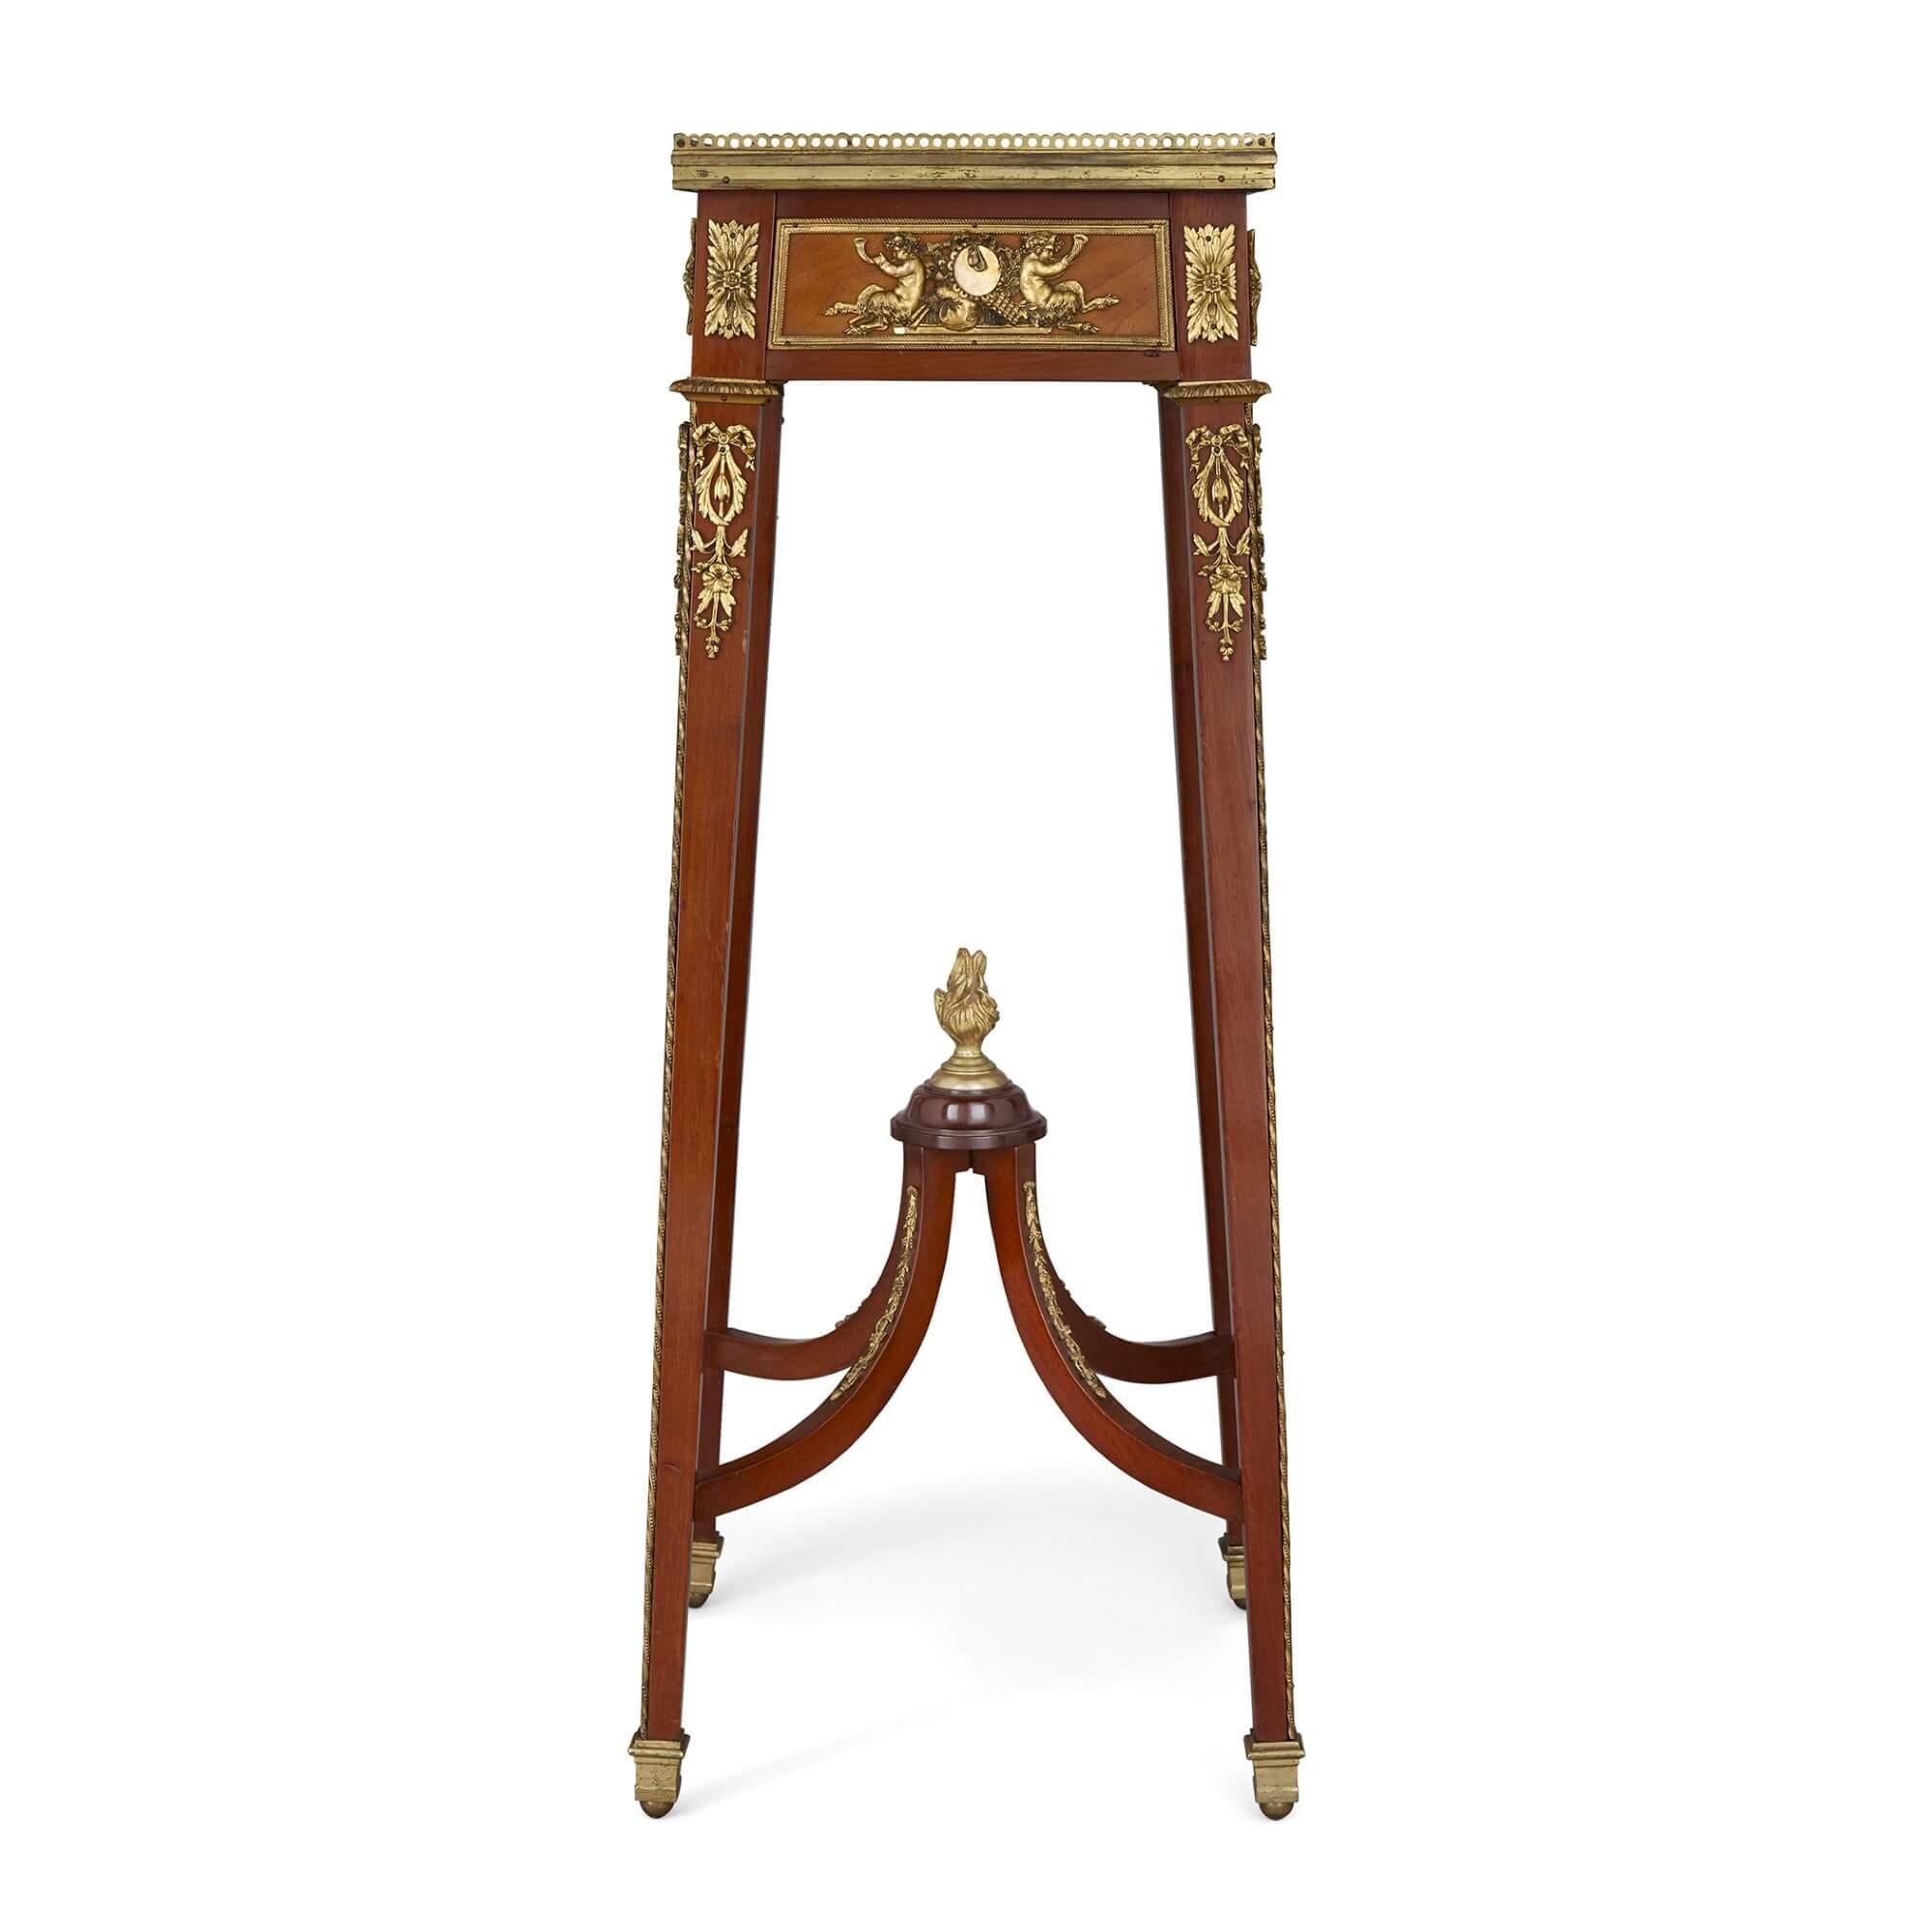 Antique ormolu and mounted mahogany stand with onyx top
French, Late 19th Century
Height 89cm, width 36cm, depth 36cm

Crafted in the Neoclassical style, and taking inspiration from various French royal styles, this tall, distinctive, and delicate